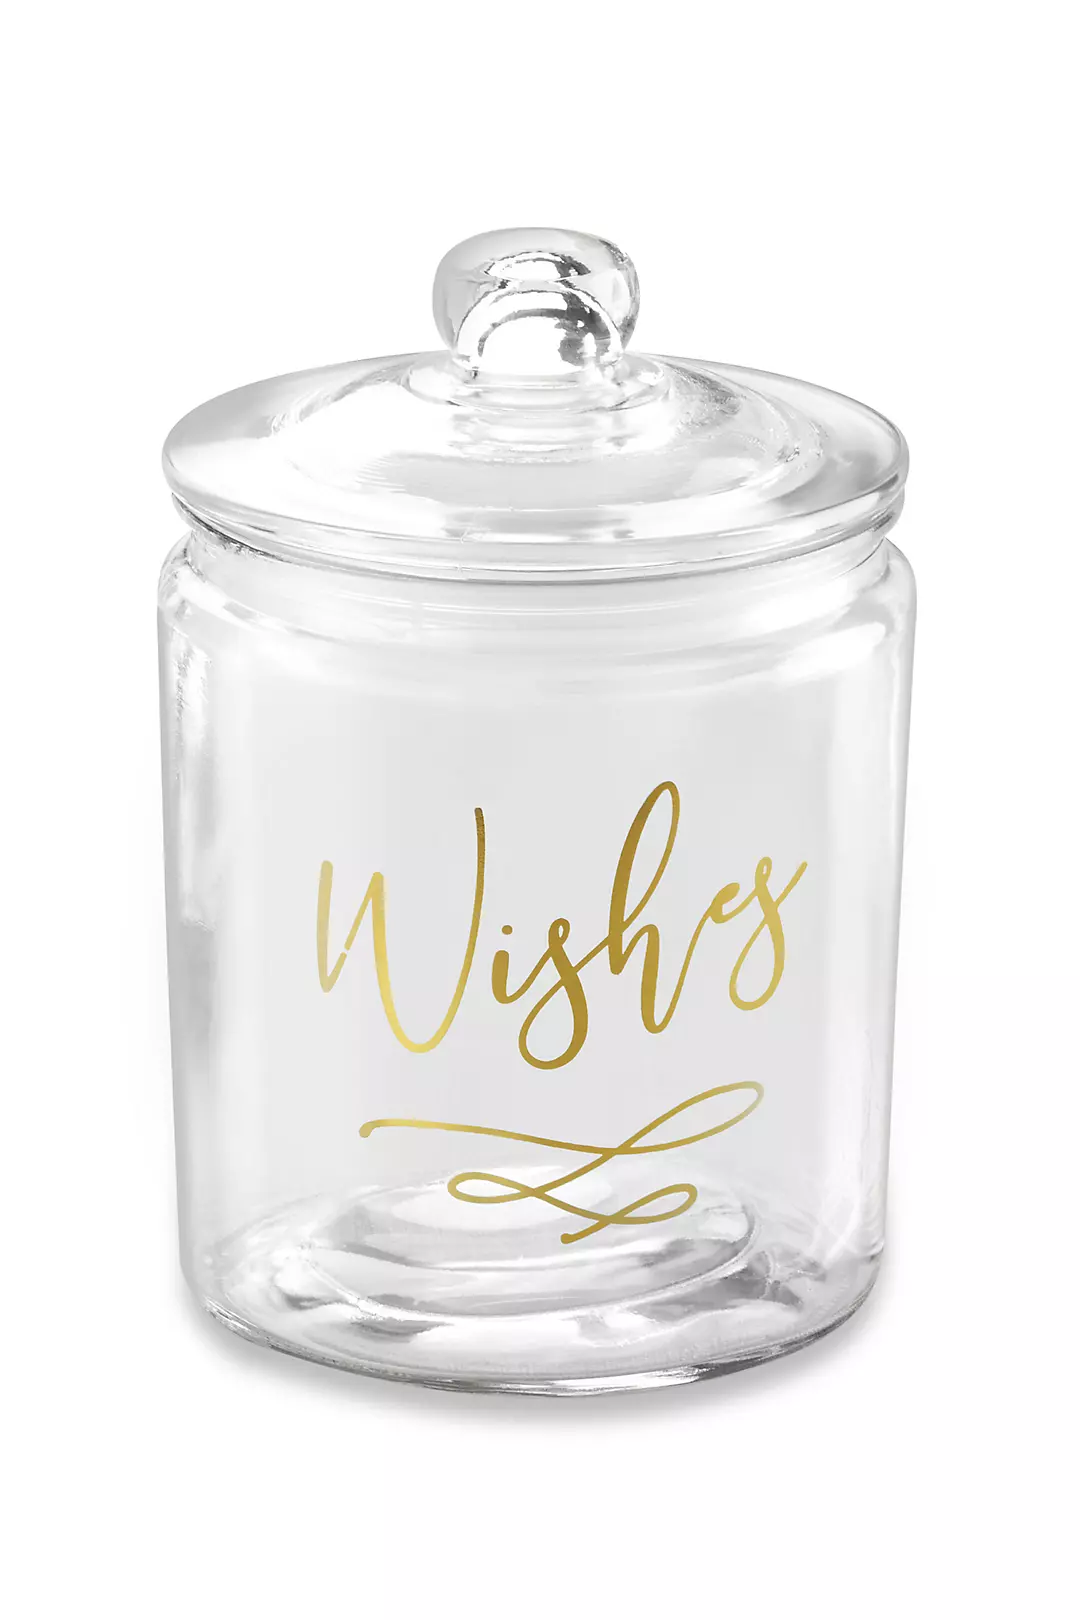 Wish Jar with Heart Shaped Cards Image